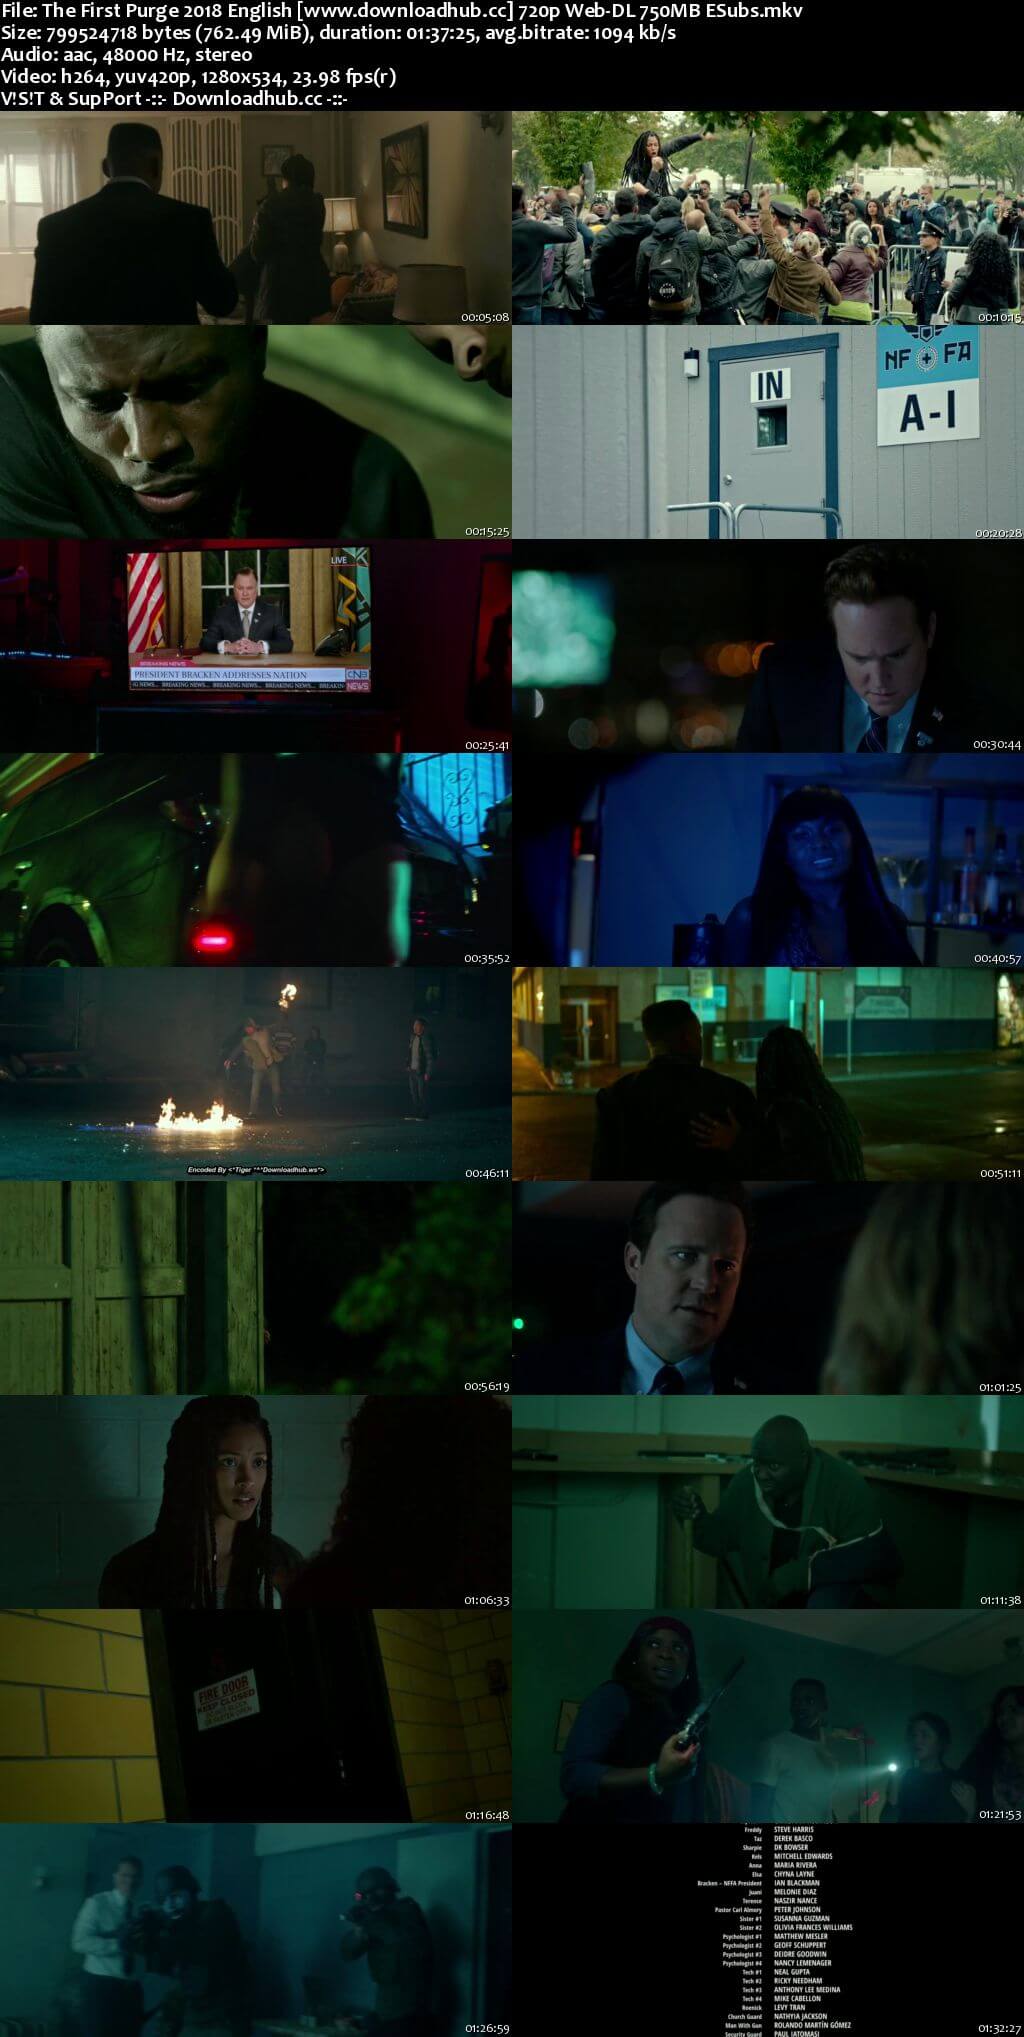 The First Purge 2018 English 720p Web-DL 750MB ESubs